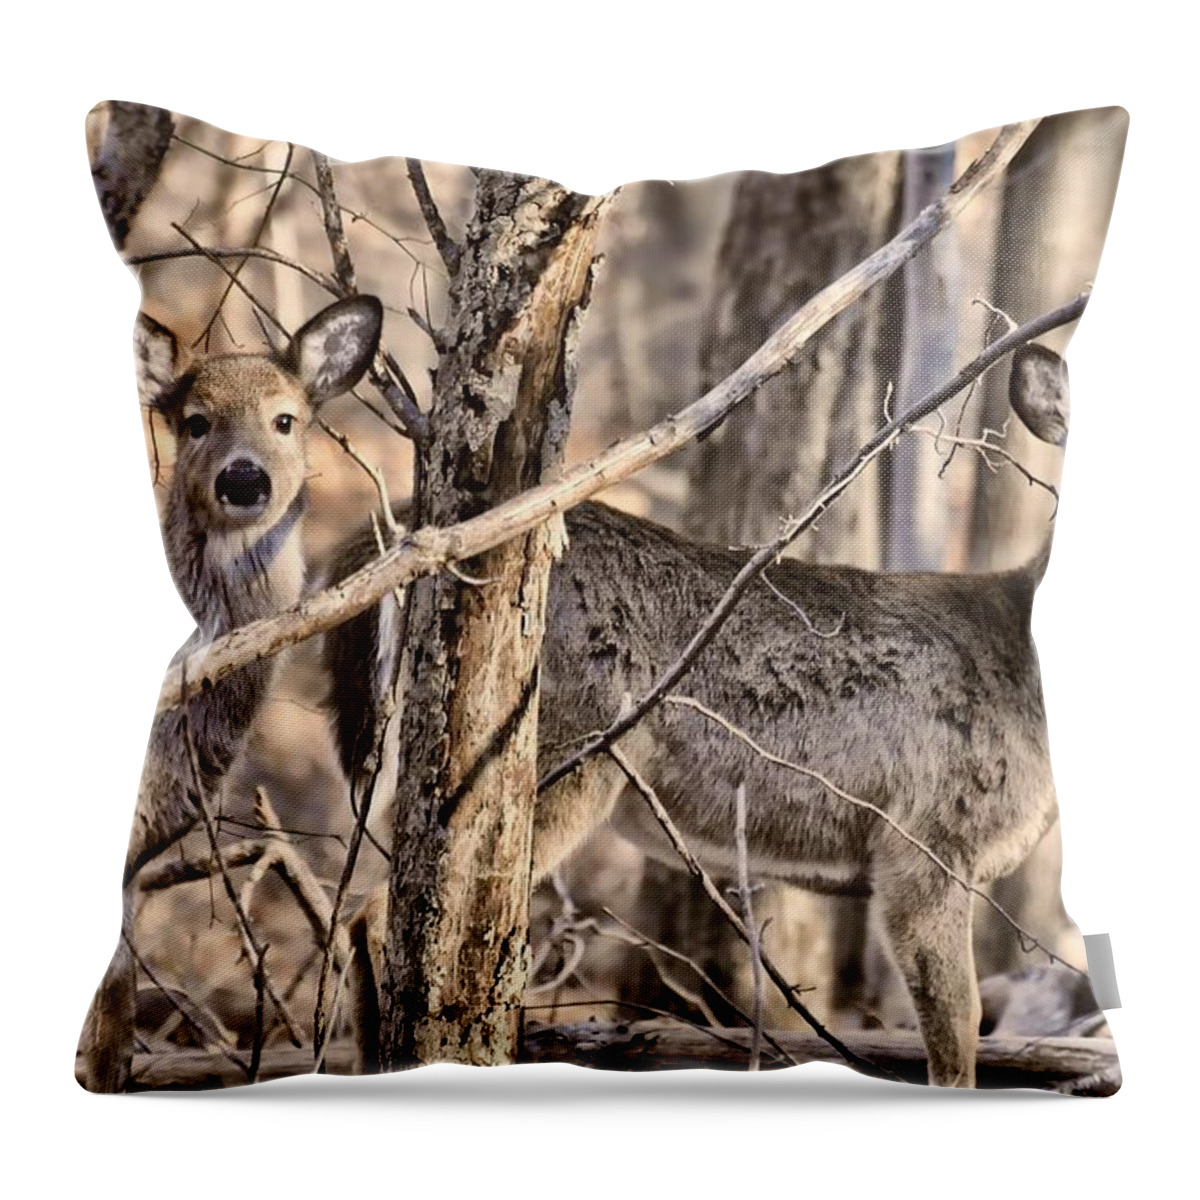 Animals Throw Pillow featuring the photograph Deerlings by Diana Angstadt